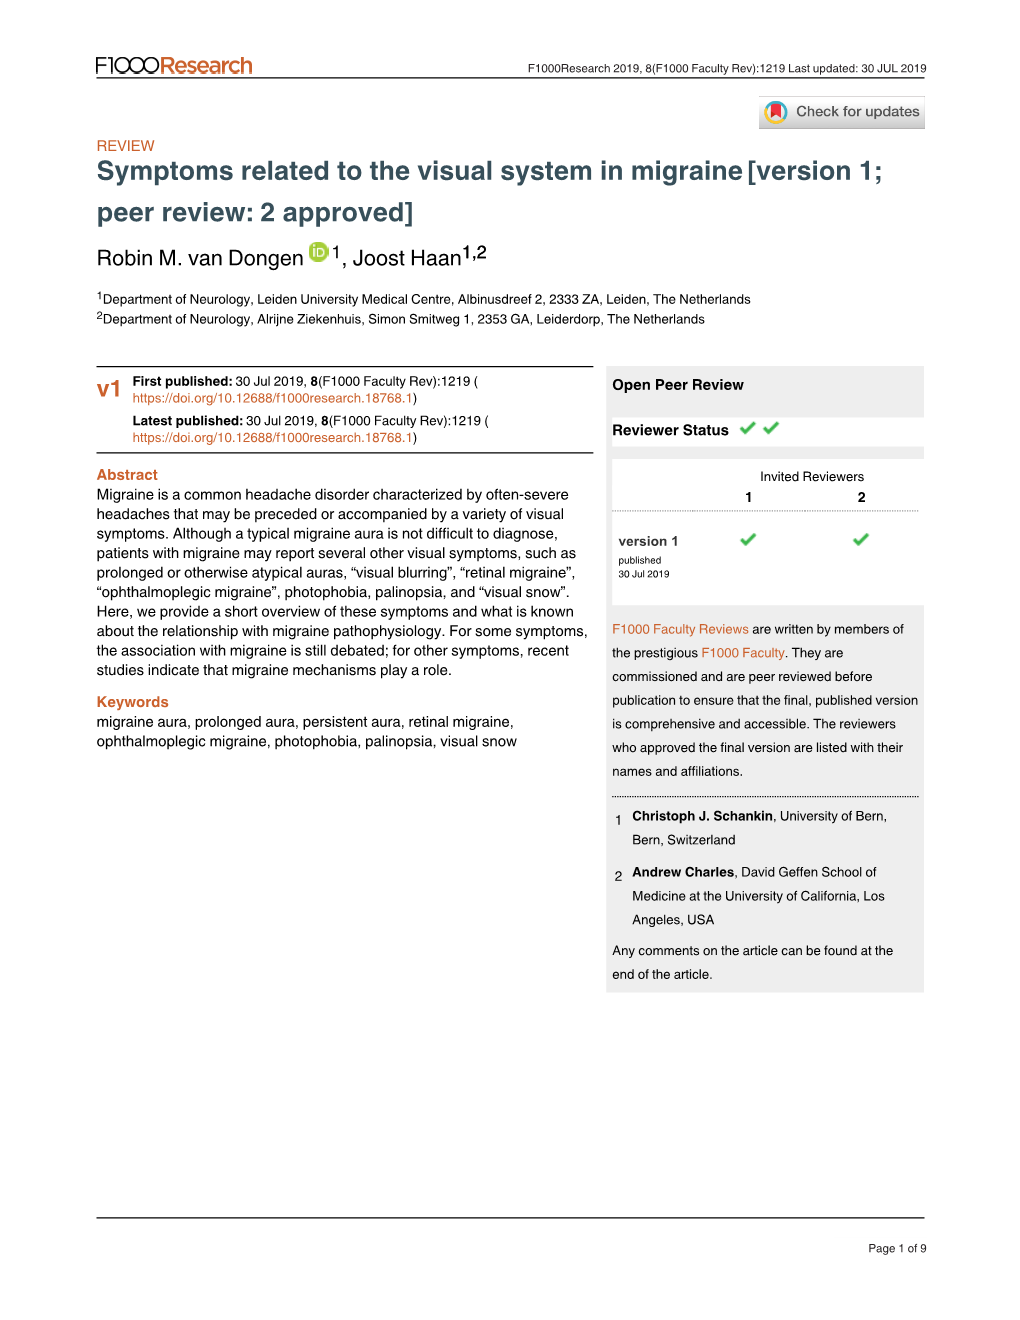 Symptoms Related to the Visual System in Migraine[Version 1; Peer Review